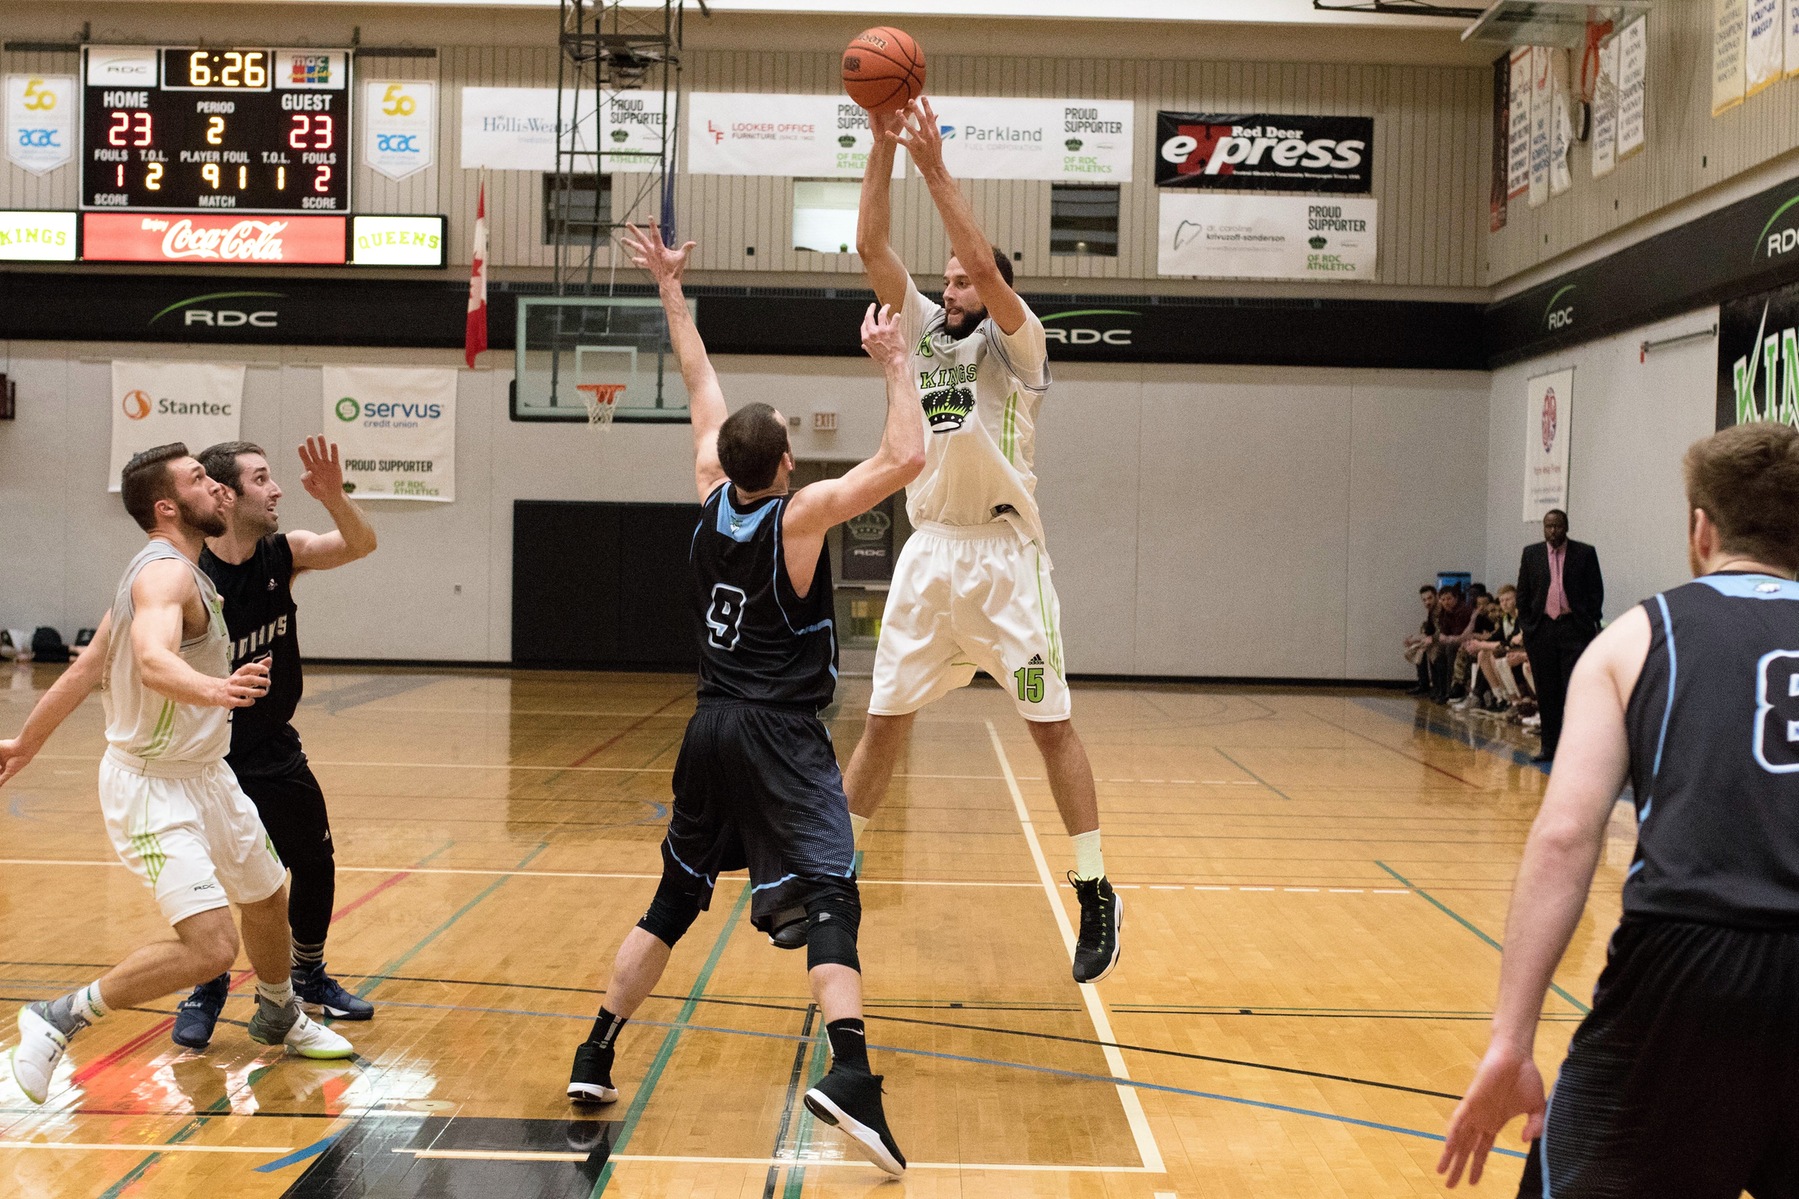 Shayne Stumpf (15) finished with 10 points, 1 steal, 2 assists and 8 rebounds in an exciting game. Matt Matear (12) contributed 17 points, 2 steals, 2 assists and 8 rebounds.
Photo - Tony Hansen